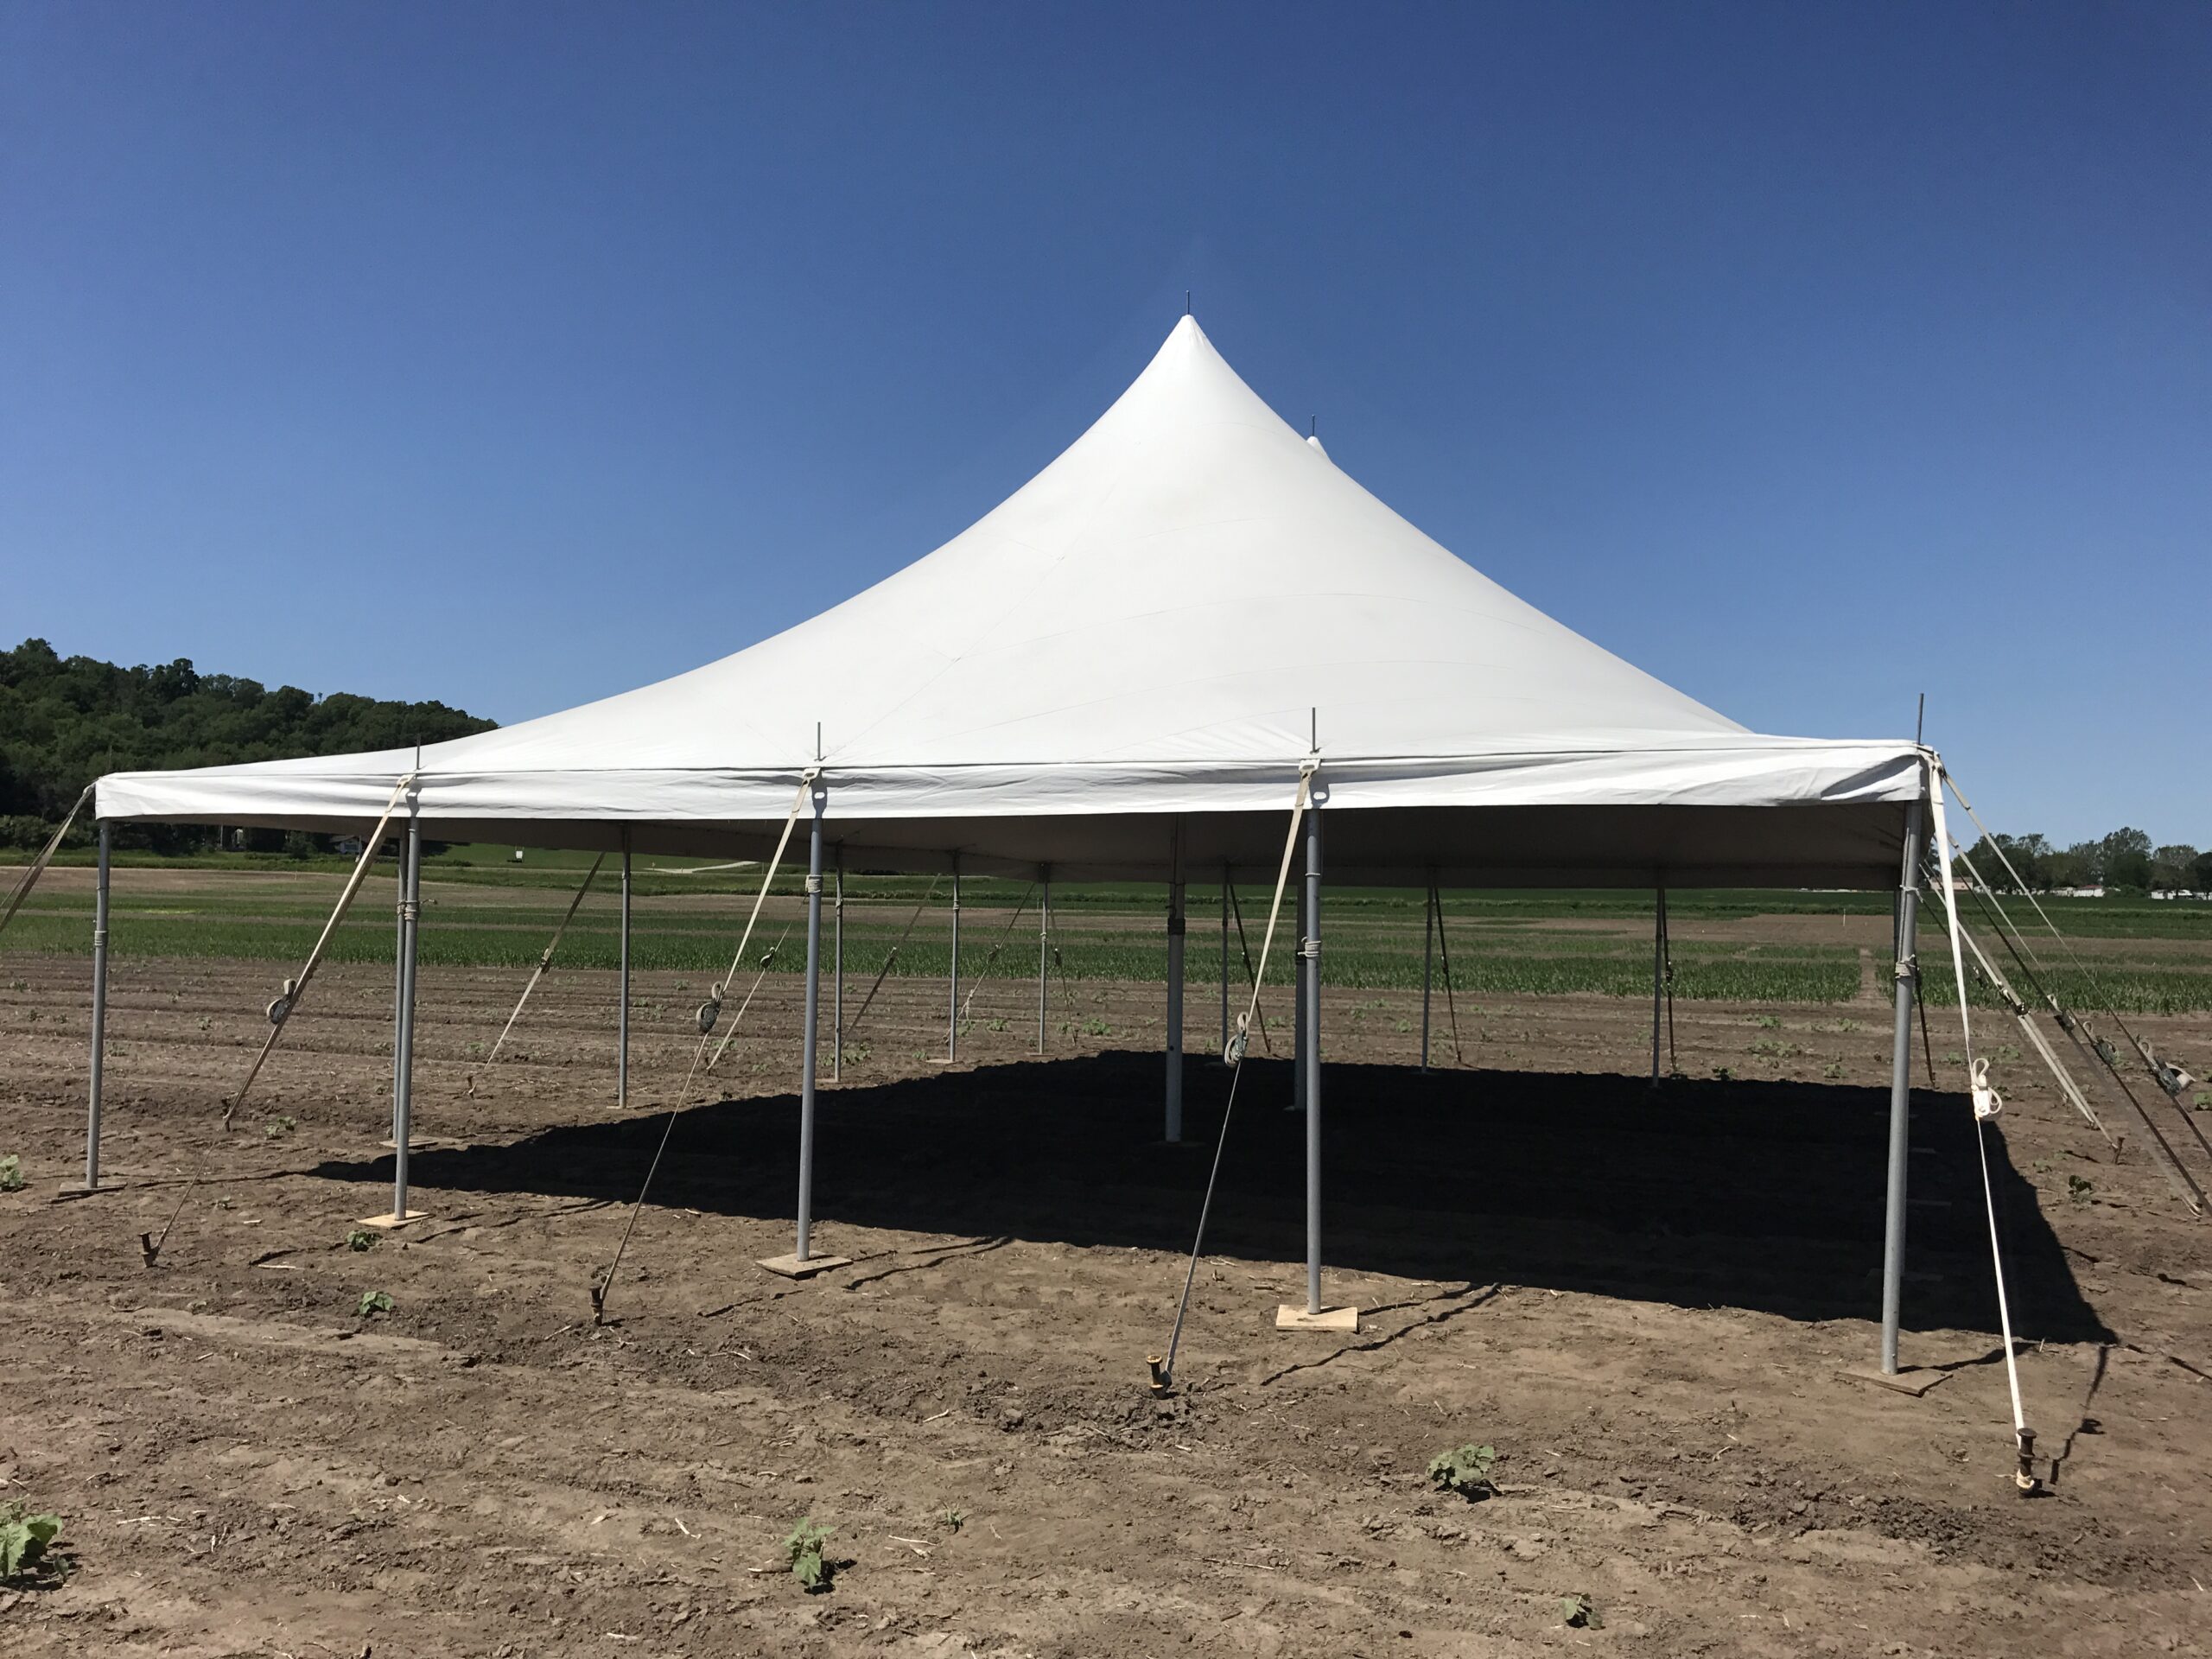 30' x 30' rope and pole tent in the field for Monsanto Agrochemical Company in Marengo, Iowa